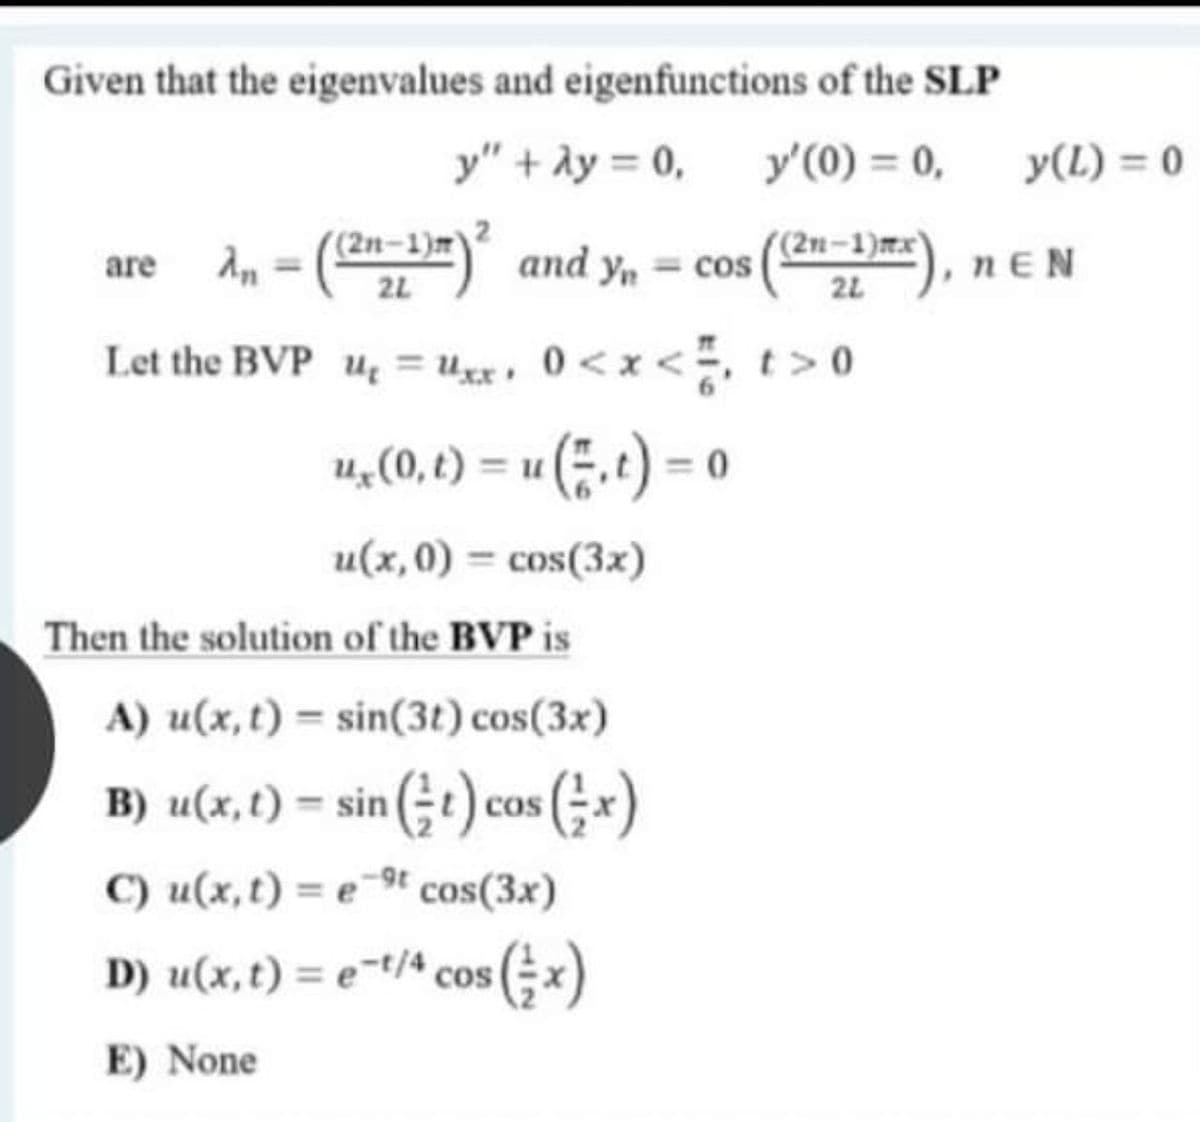 Given that the eigenvalues and eigenfunctions of the SLP
y" + ày = 0,
y'(0) = 0,
y(L) = 0
%3D
are An = ()° and y, = cos
(2n–1)"
(2n–1)mx)
nEN
2L
22
Let the BVP u = uxx, 0<x <, t> 0
u, (0, t) = u (.t) = 0
%3D
u(x,0) = cos(3x)
Then the solution of the BVP is
A) u(x, t) = sin(3t) cos(3x)
B) u(x,t) = sin (÷t) cos (;*x)
C) u(x,t) = e-9t cos(3x)
D) u(x, t) = e-t/4 cos
(;x)
E) None
